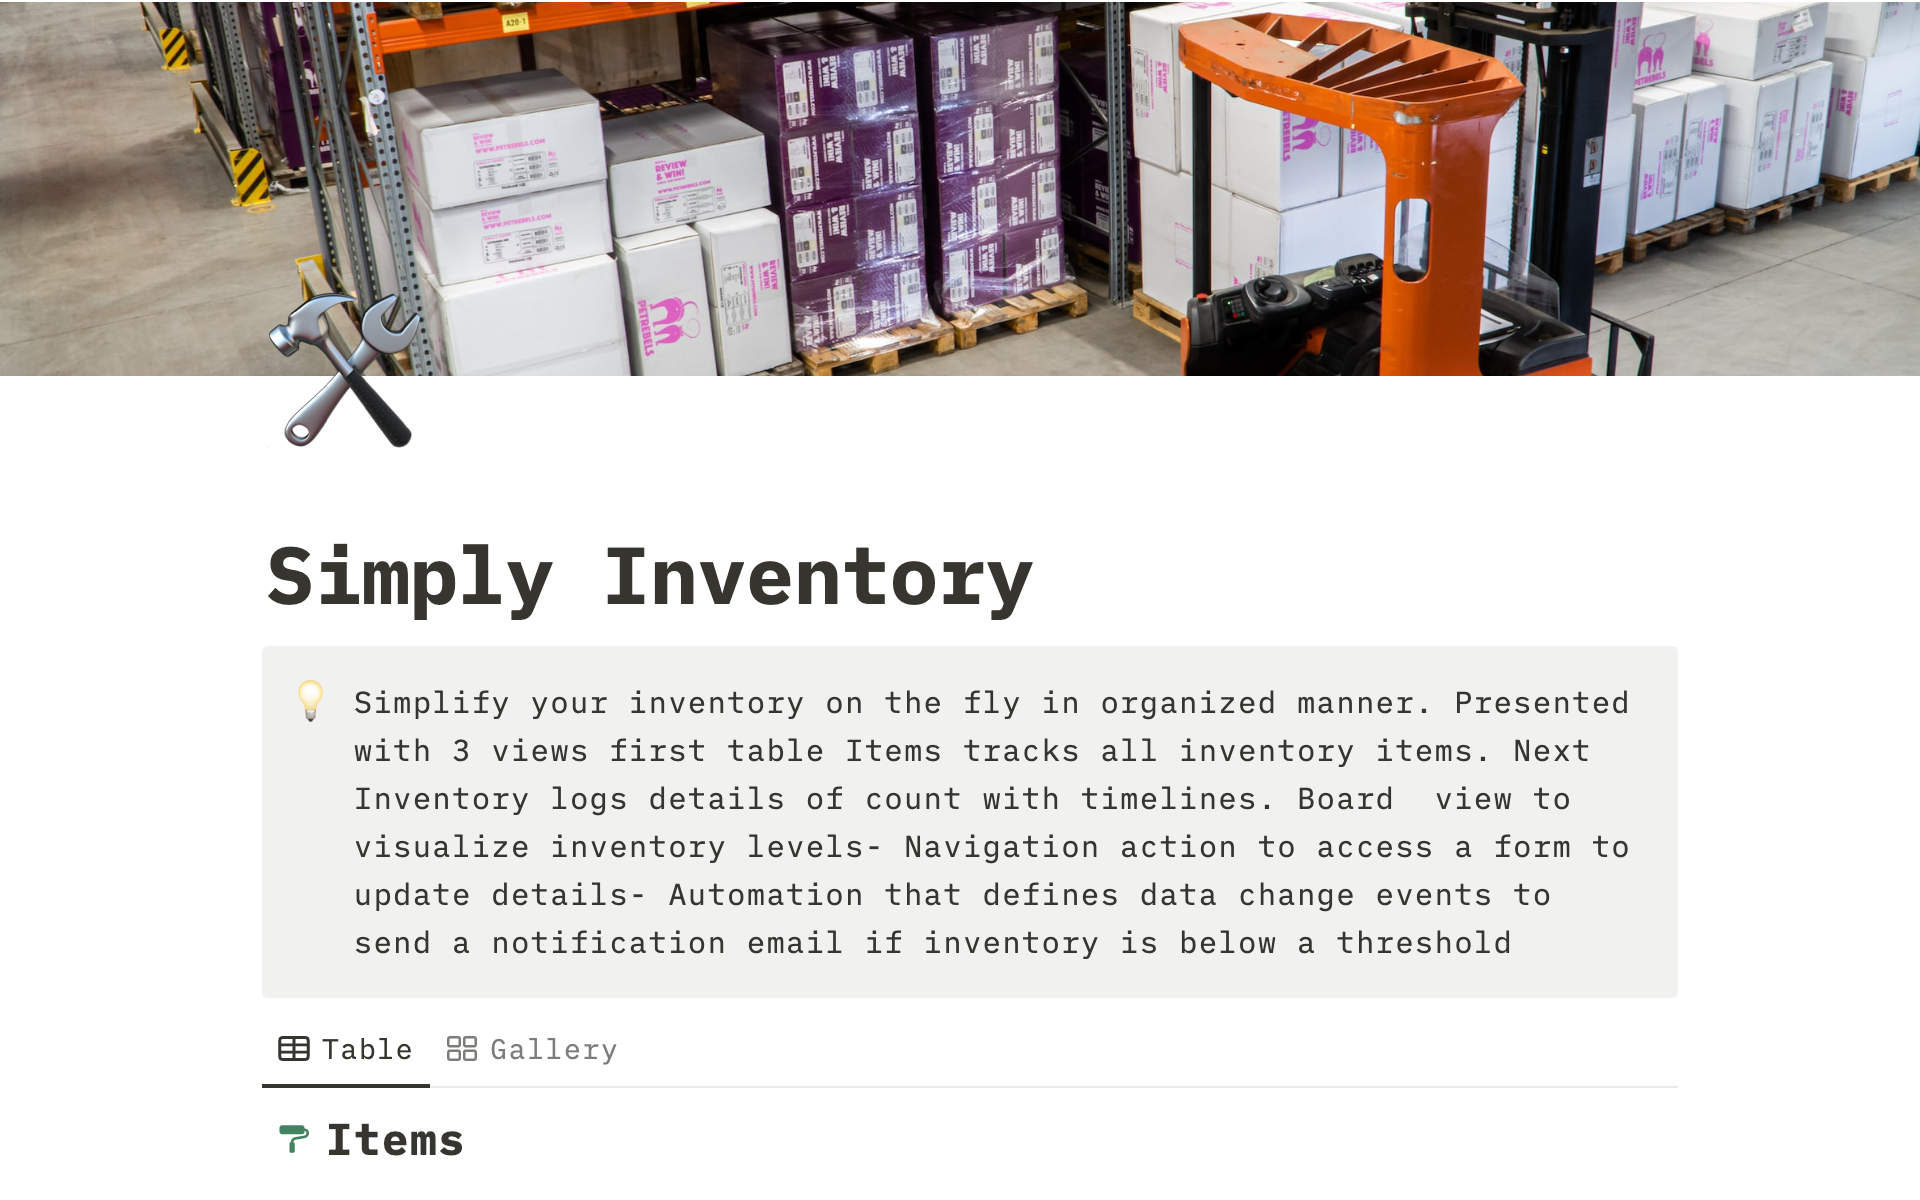 It allows planners the plan inventory following an organized way. This template gives an idea how they achieve it.